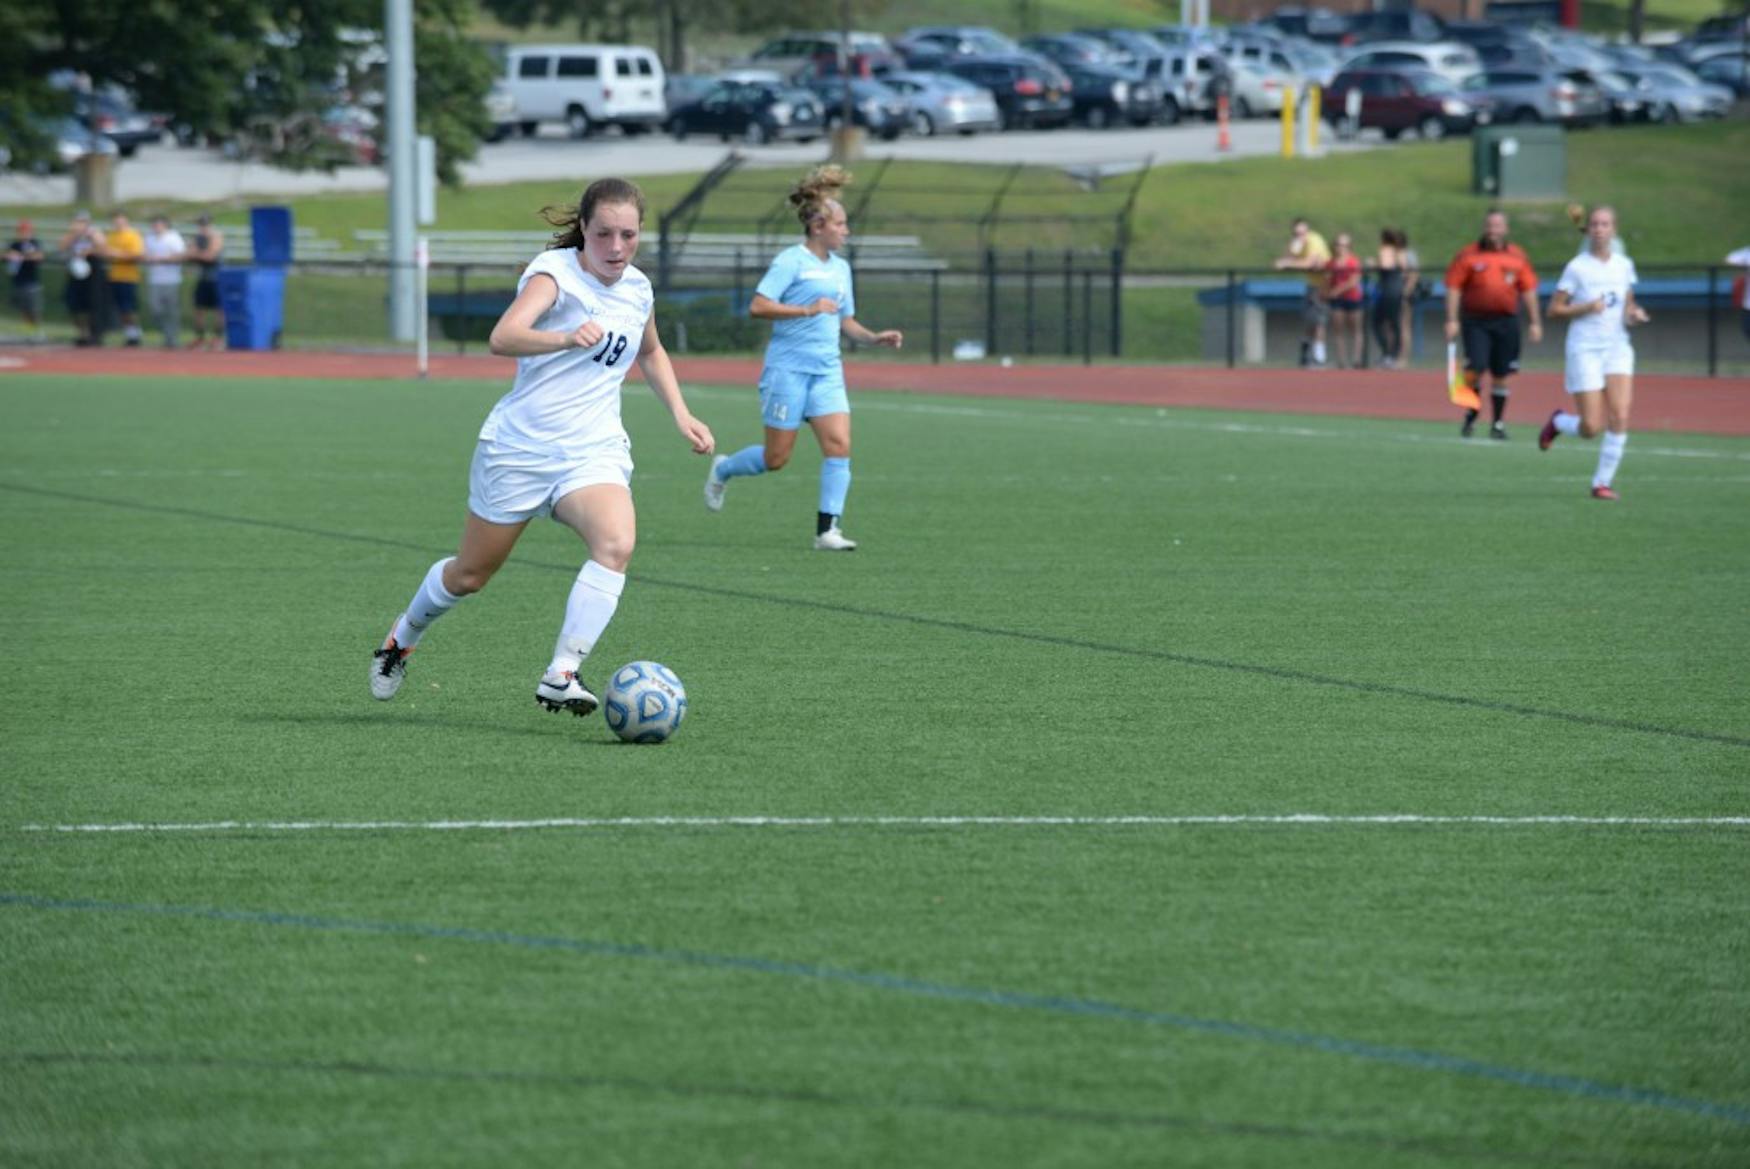 OPEN FIELD: Forward Samantha Schwartz ’18 controls the ball in a victory against Lasell College on Sept. 6 of last year.